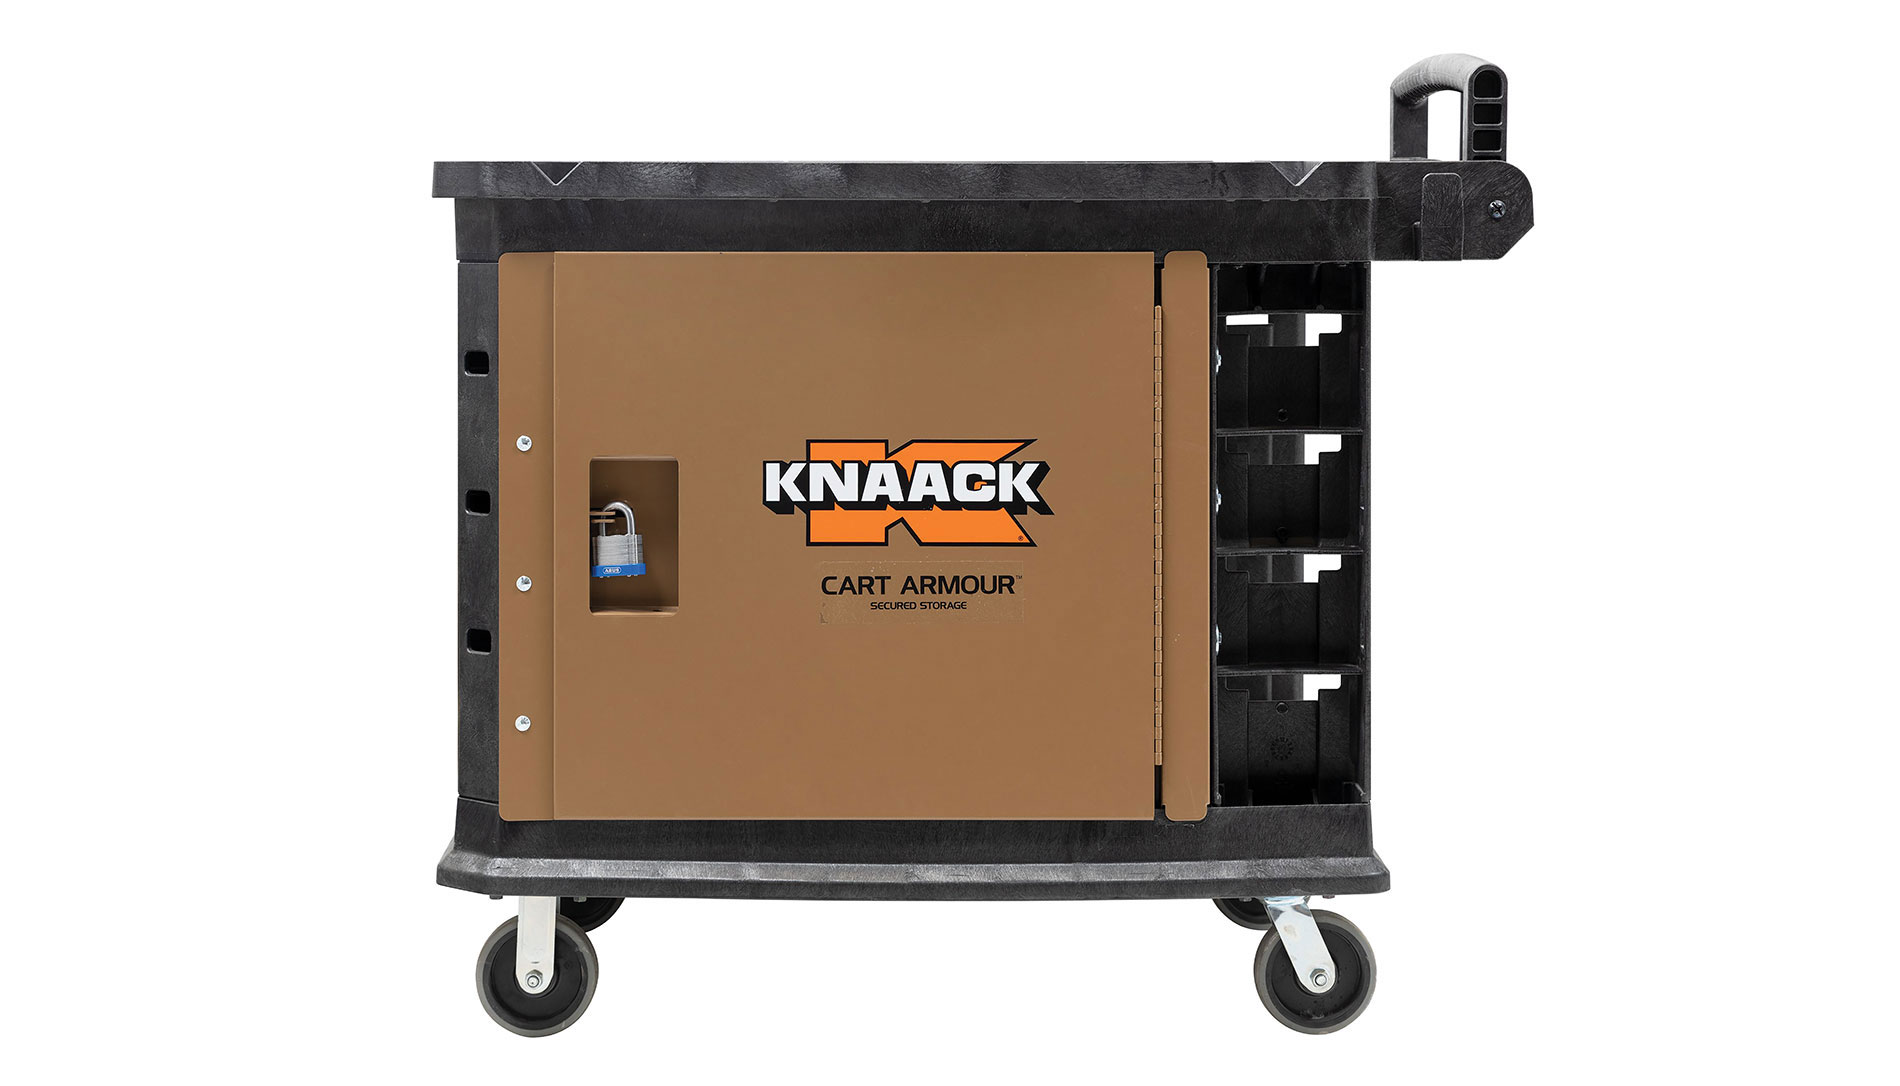 Brown cart paneling system with Knaack logo. Image by Knaack LLC.